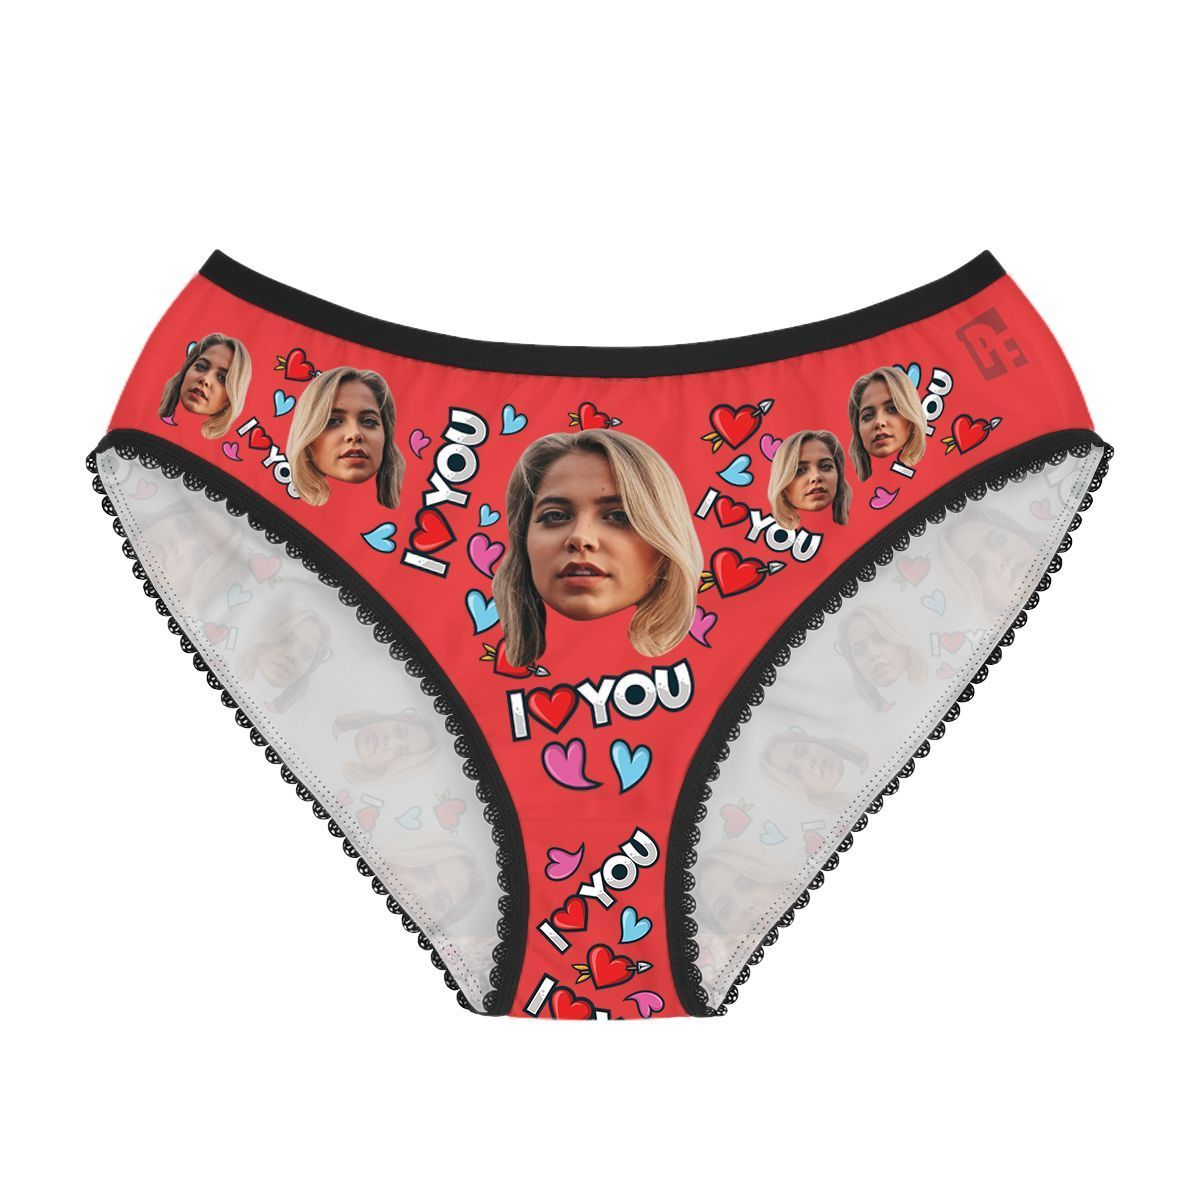 Red Love you women's underwear briefs personalized with photo printed on them